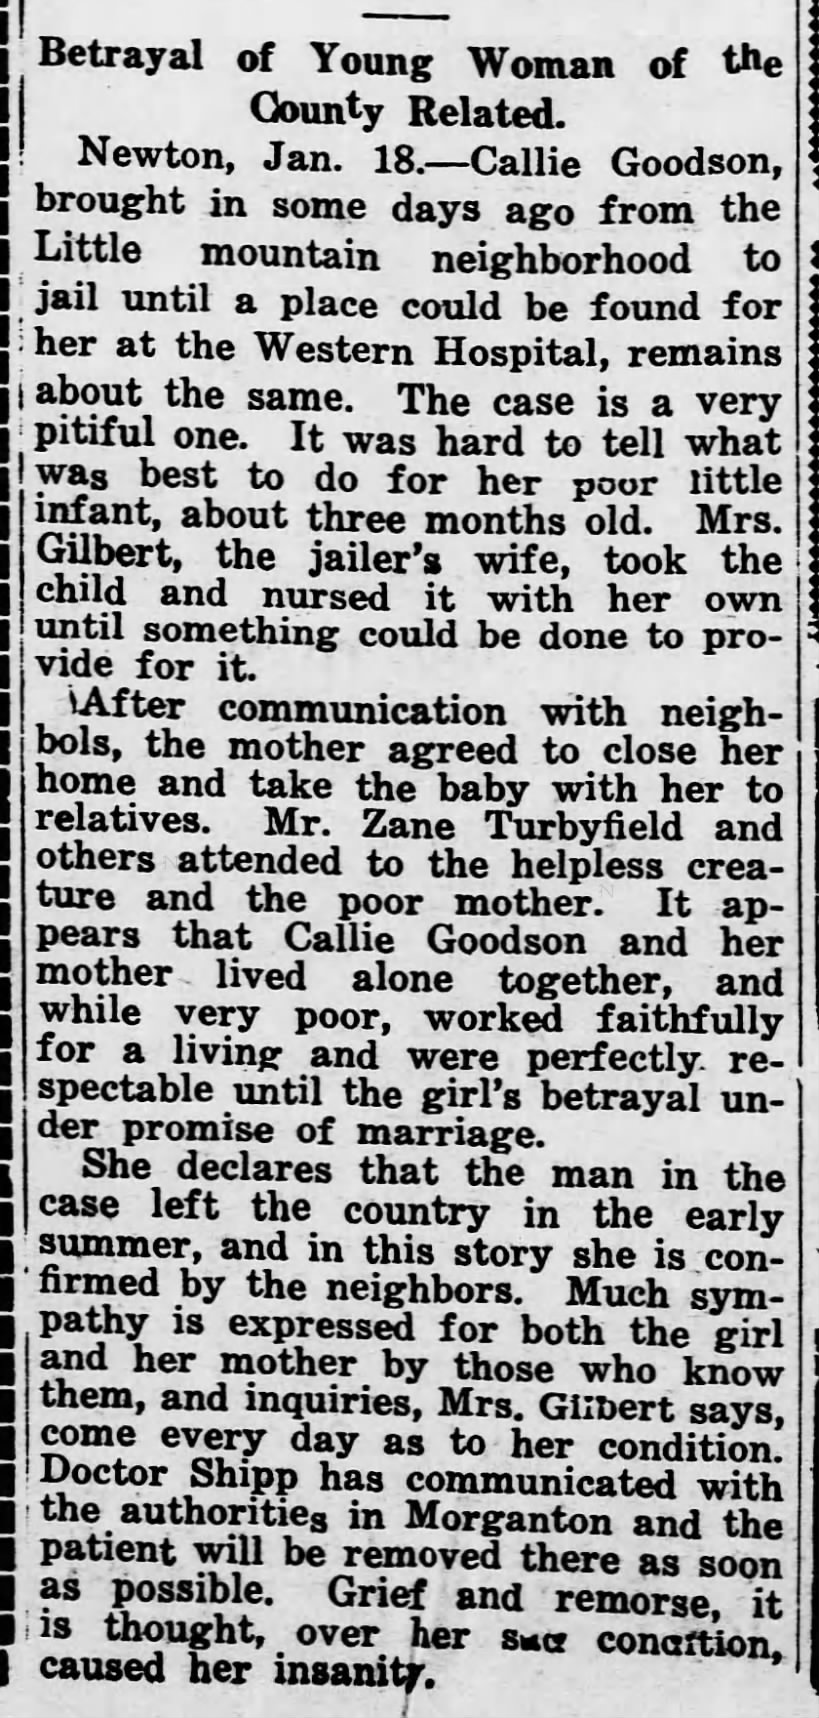 Goodson, Callie - detailed story in the Hickory Daily Record - 18 Jan 1916